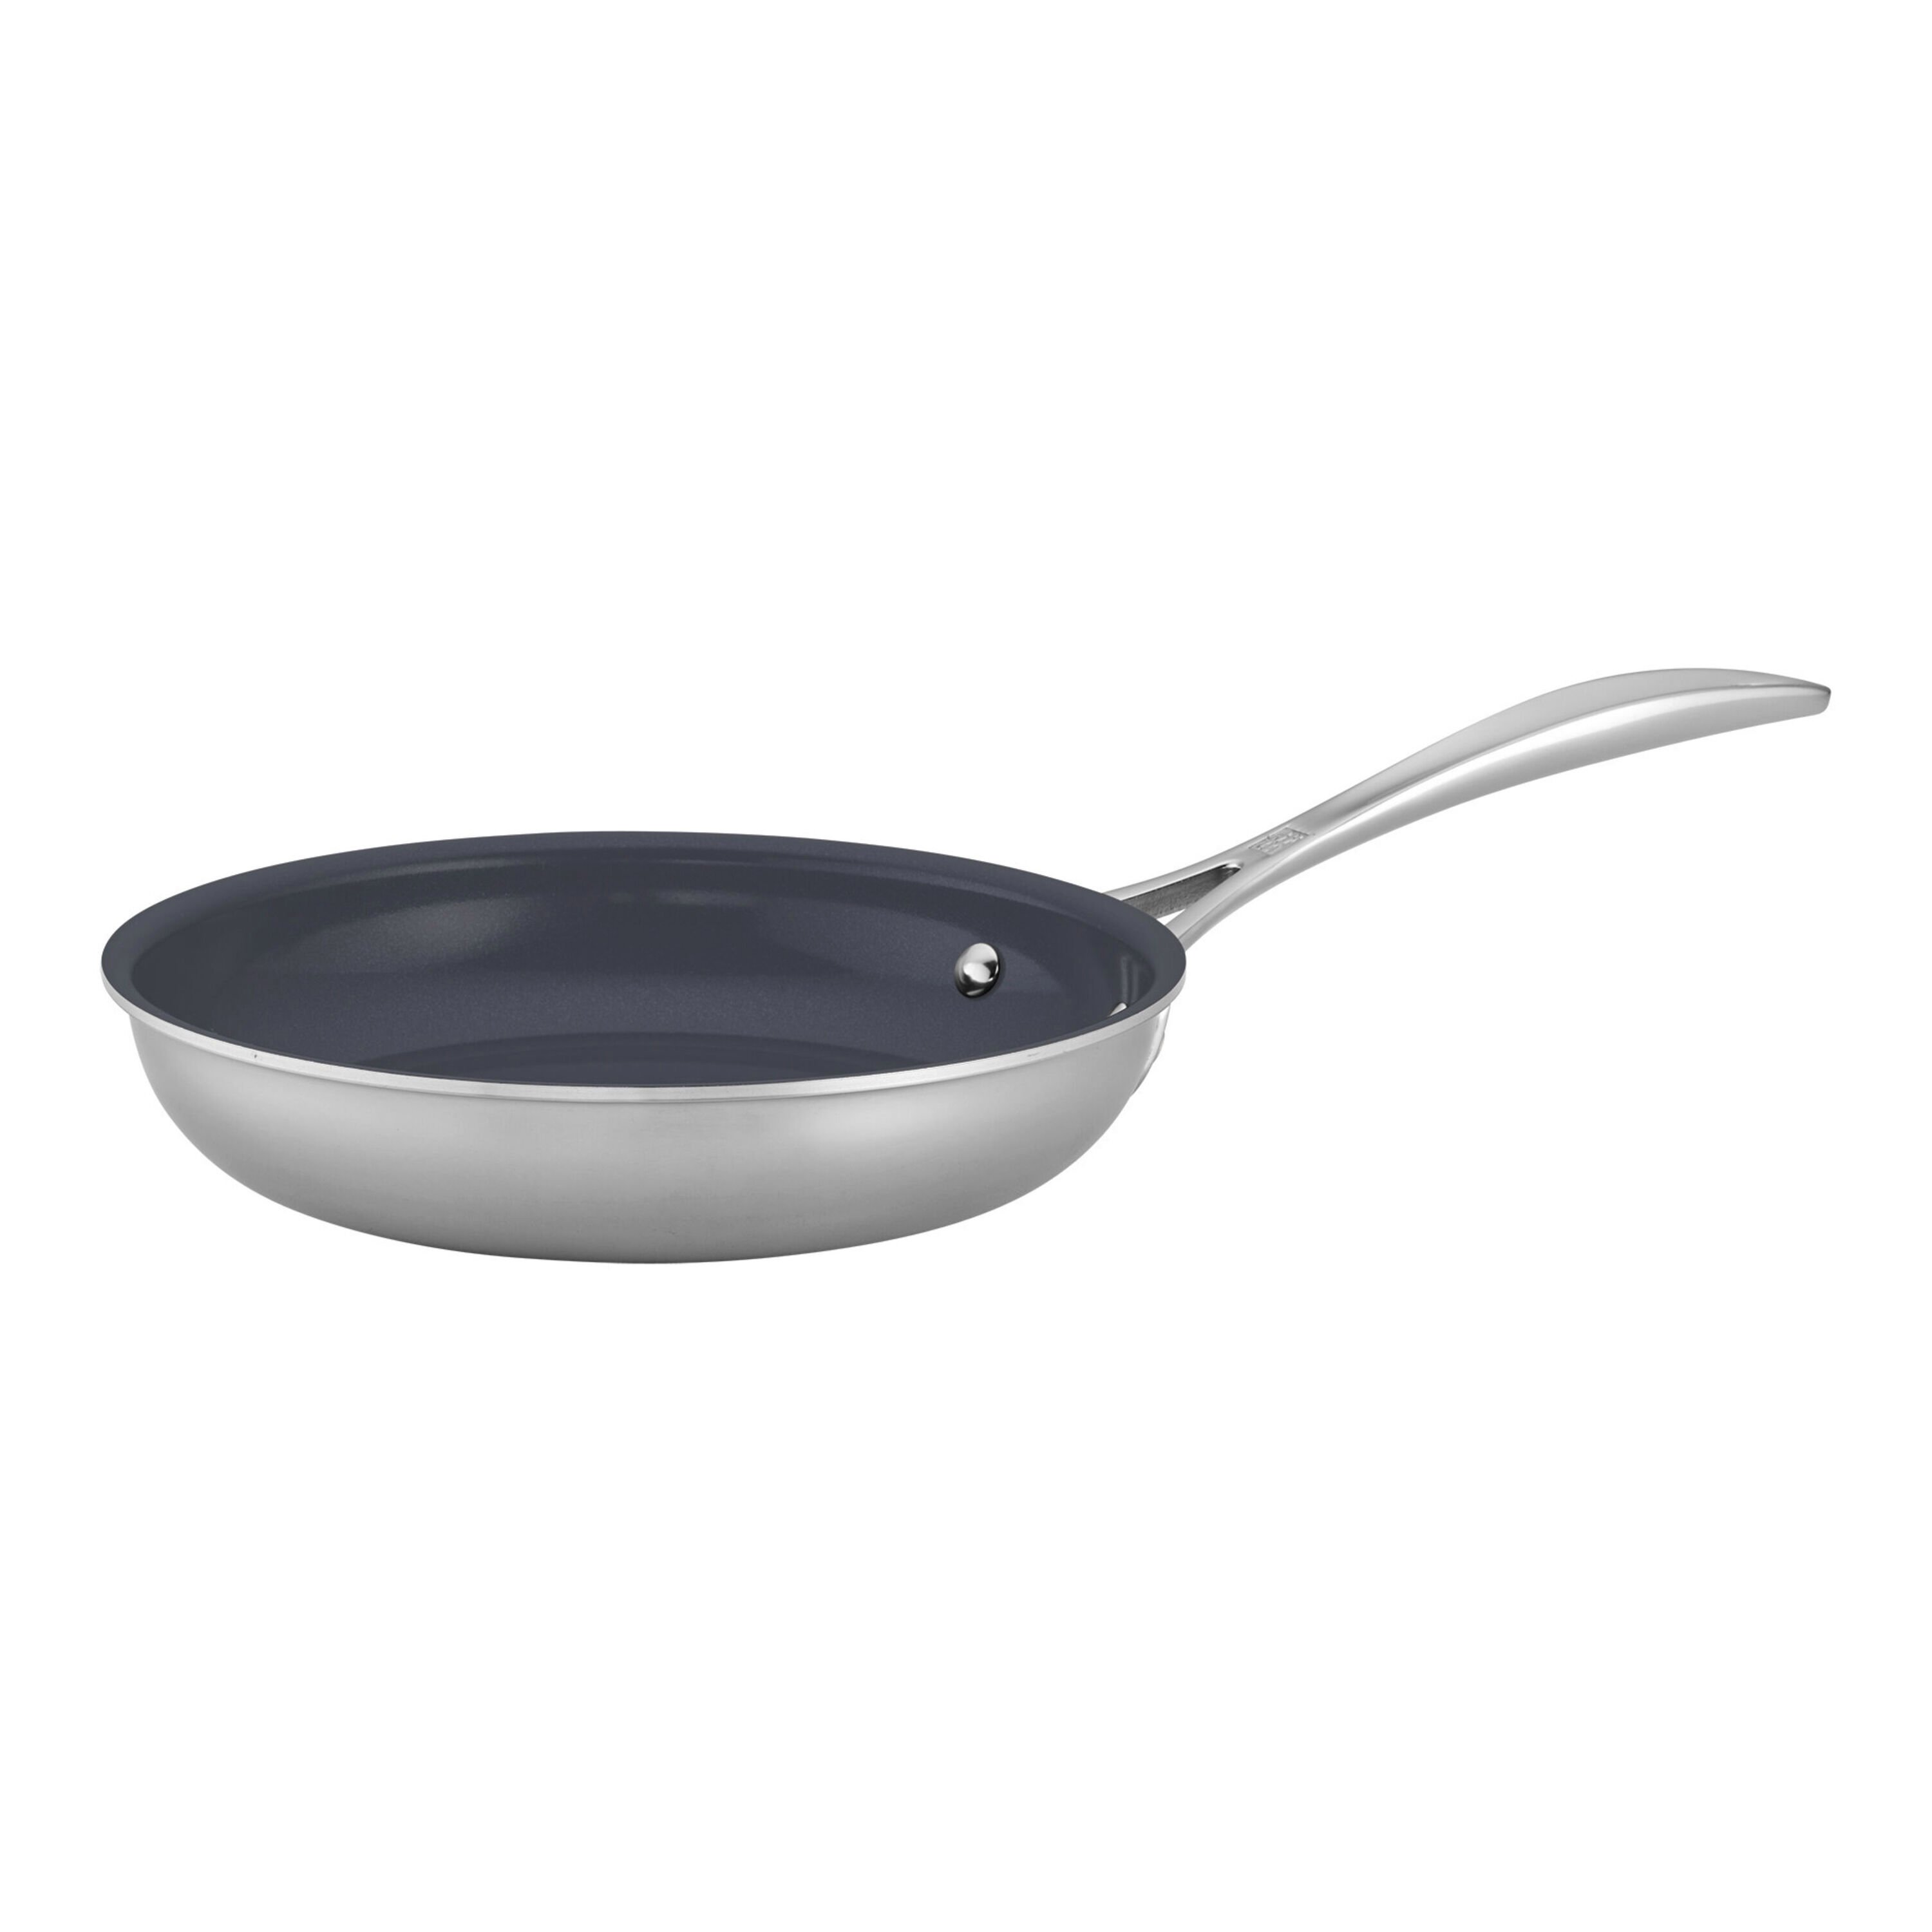 Zwilling Clad CFX 10-Inch, Stainless Steel, Ceramic, Non-Stick, Frying Pan